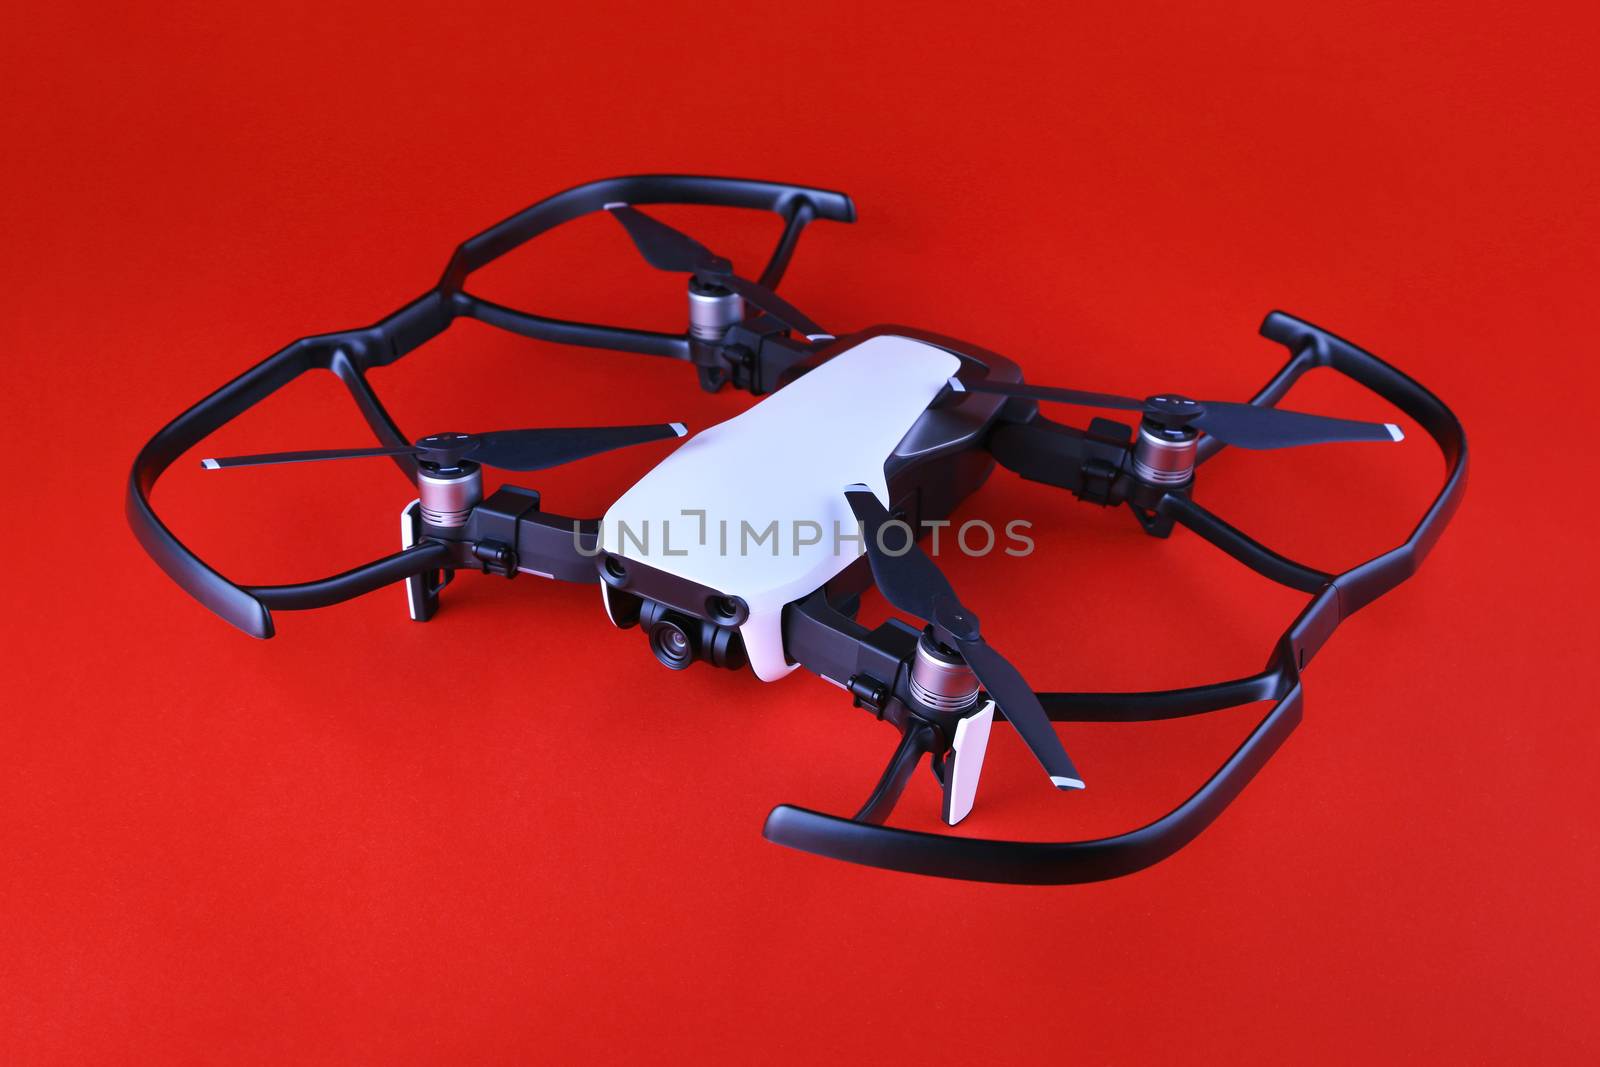 Uav drone copter isolated on red background. by Sid10